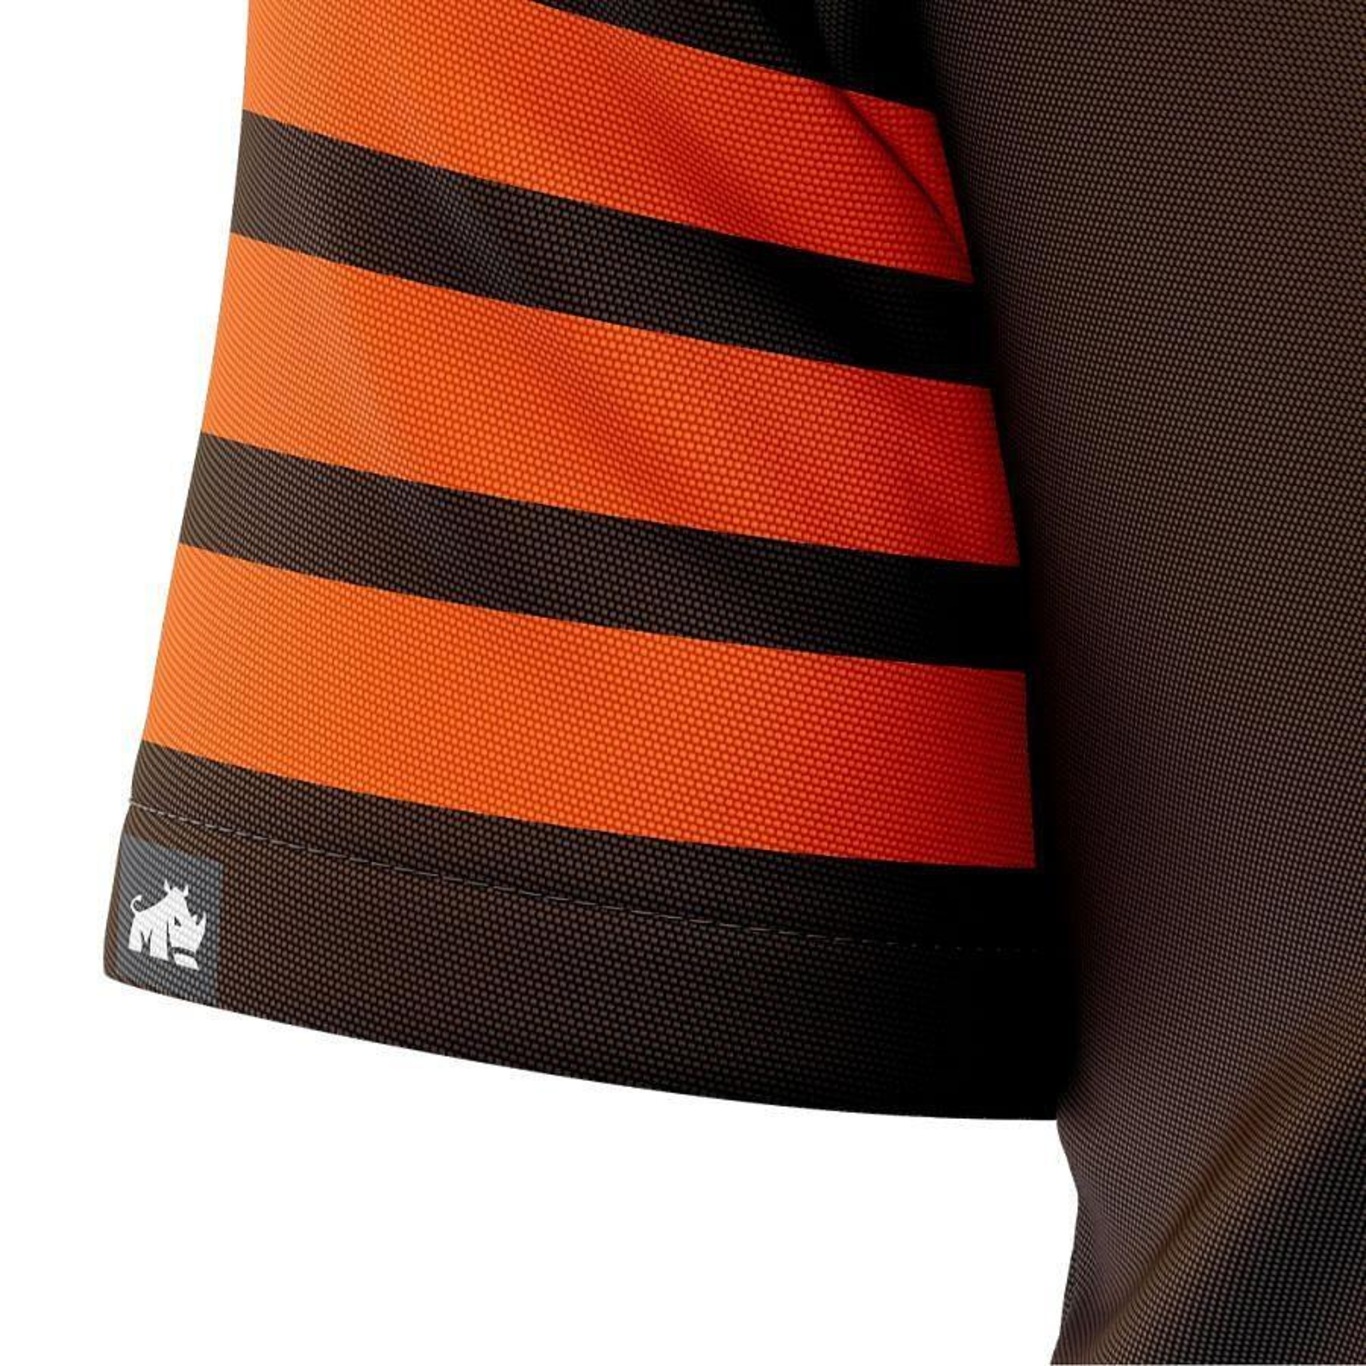 Camiseta Cleveland Browns Dry Retrô Rinno Force - Masculina - Foto 4